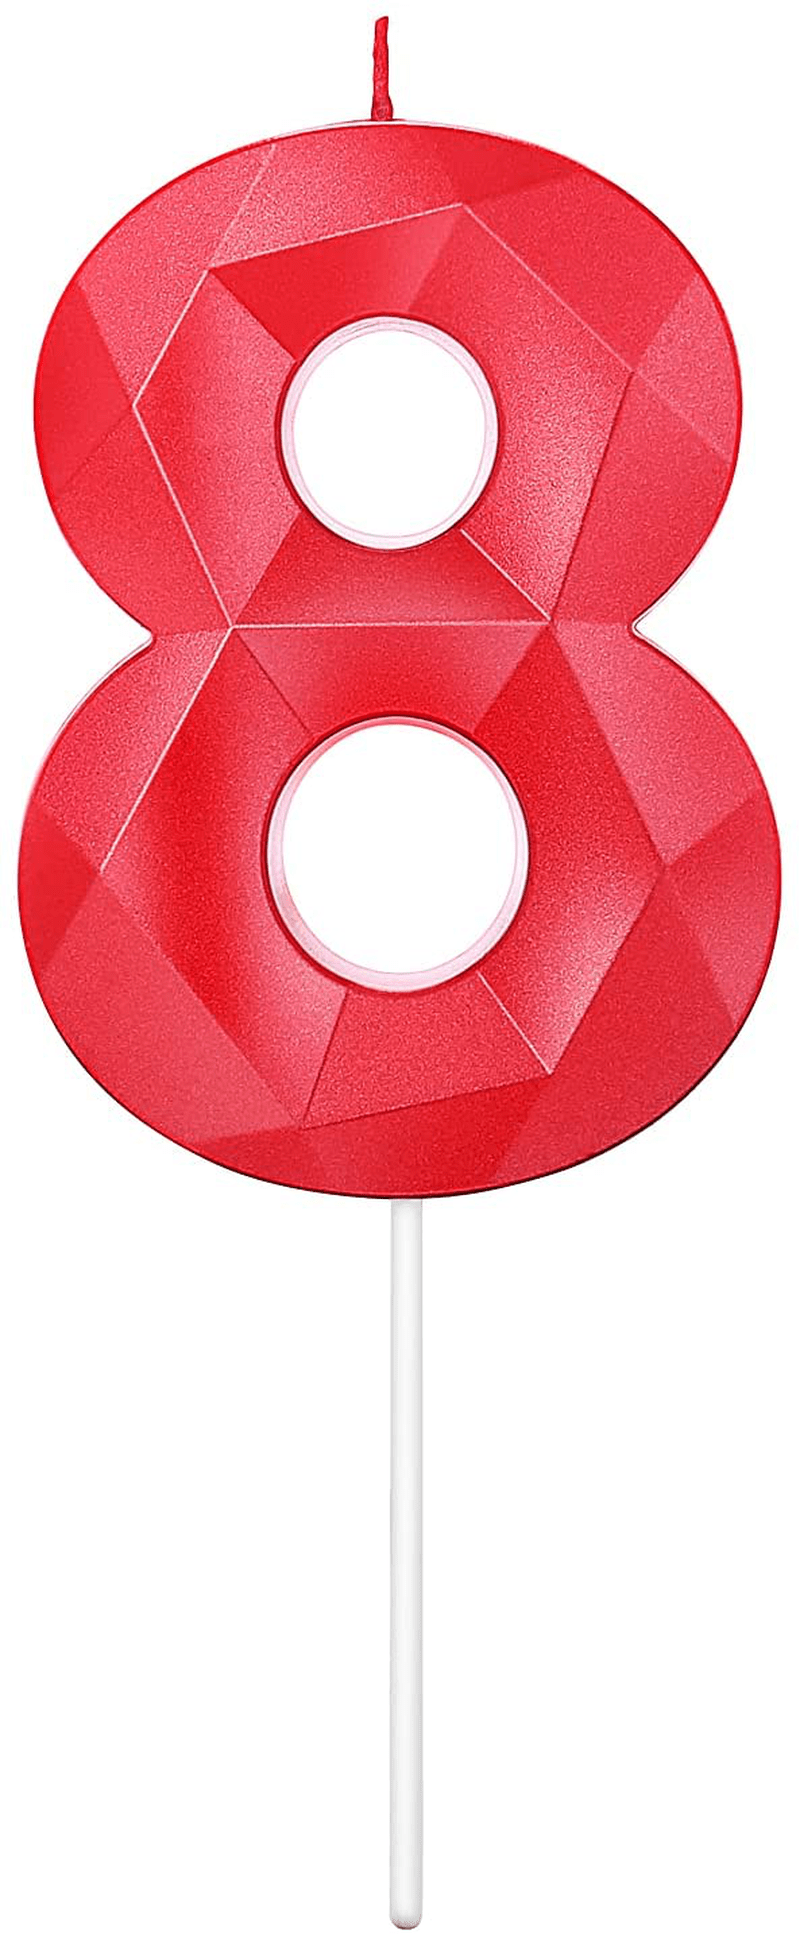 2.76 Inches 3D Diamond Shape Birthday Cake Candle Number 2 ,Red Color Happy Birthday Cake Cupcake Toppers Decoration for Wedding Anniversary,Party Celebration,Family Baking(RED Number 2) Home & Garden > Decor > Home Fragrances > Candles MEIMEI Red number 8 